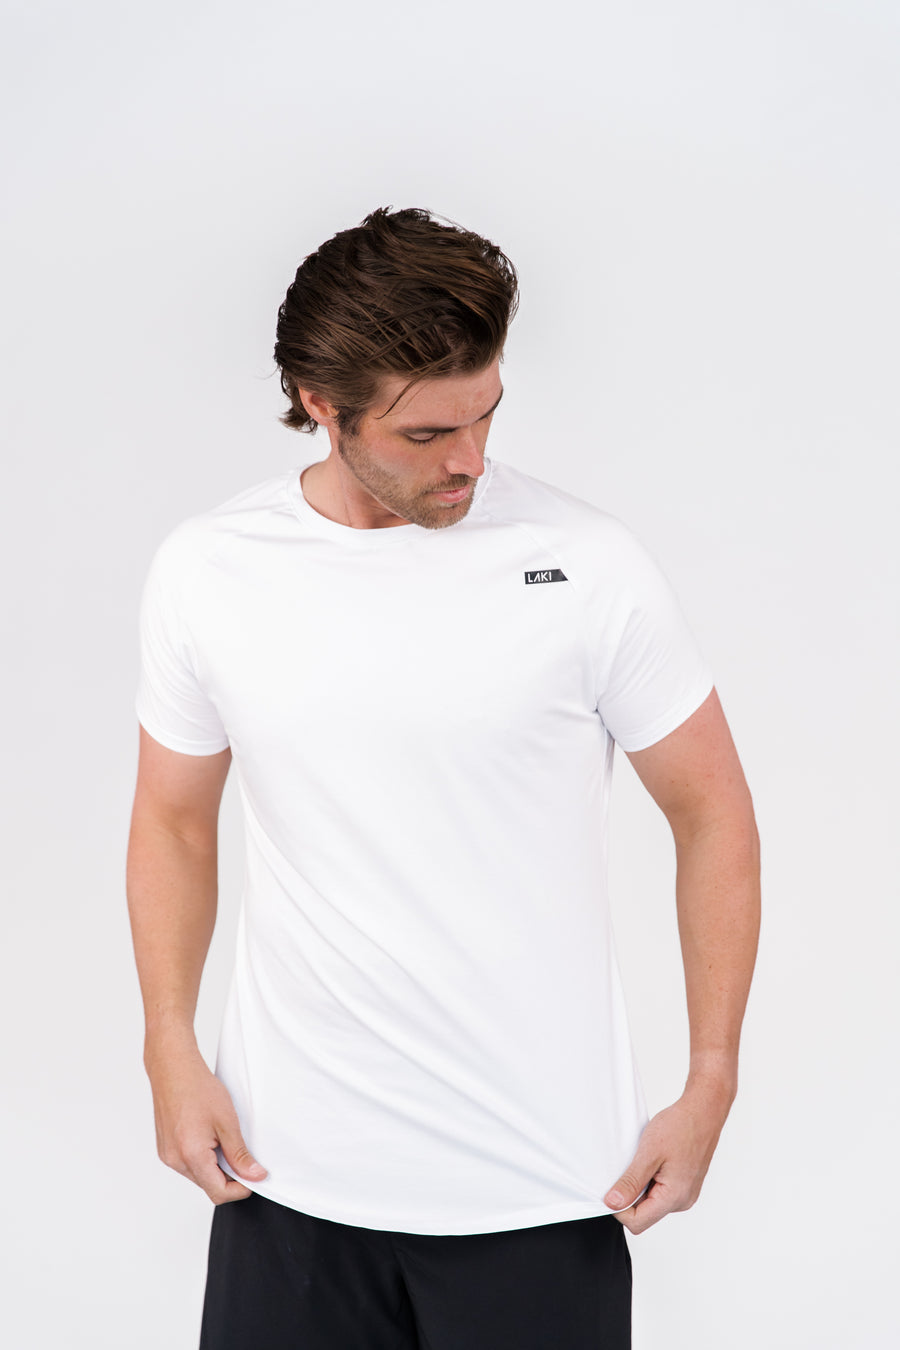 AGILITY T-SHIRT - FROST